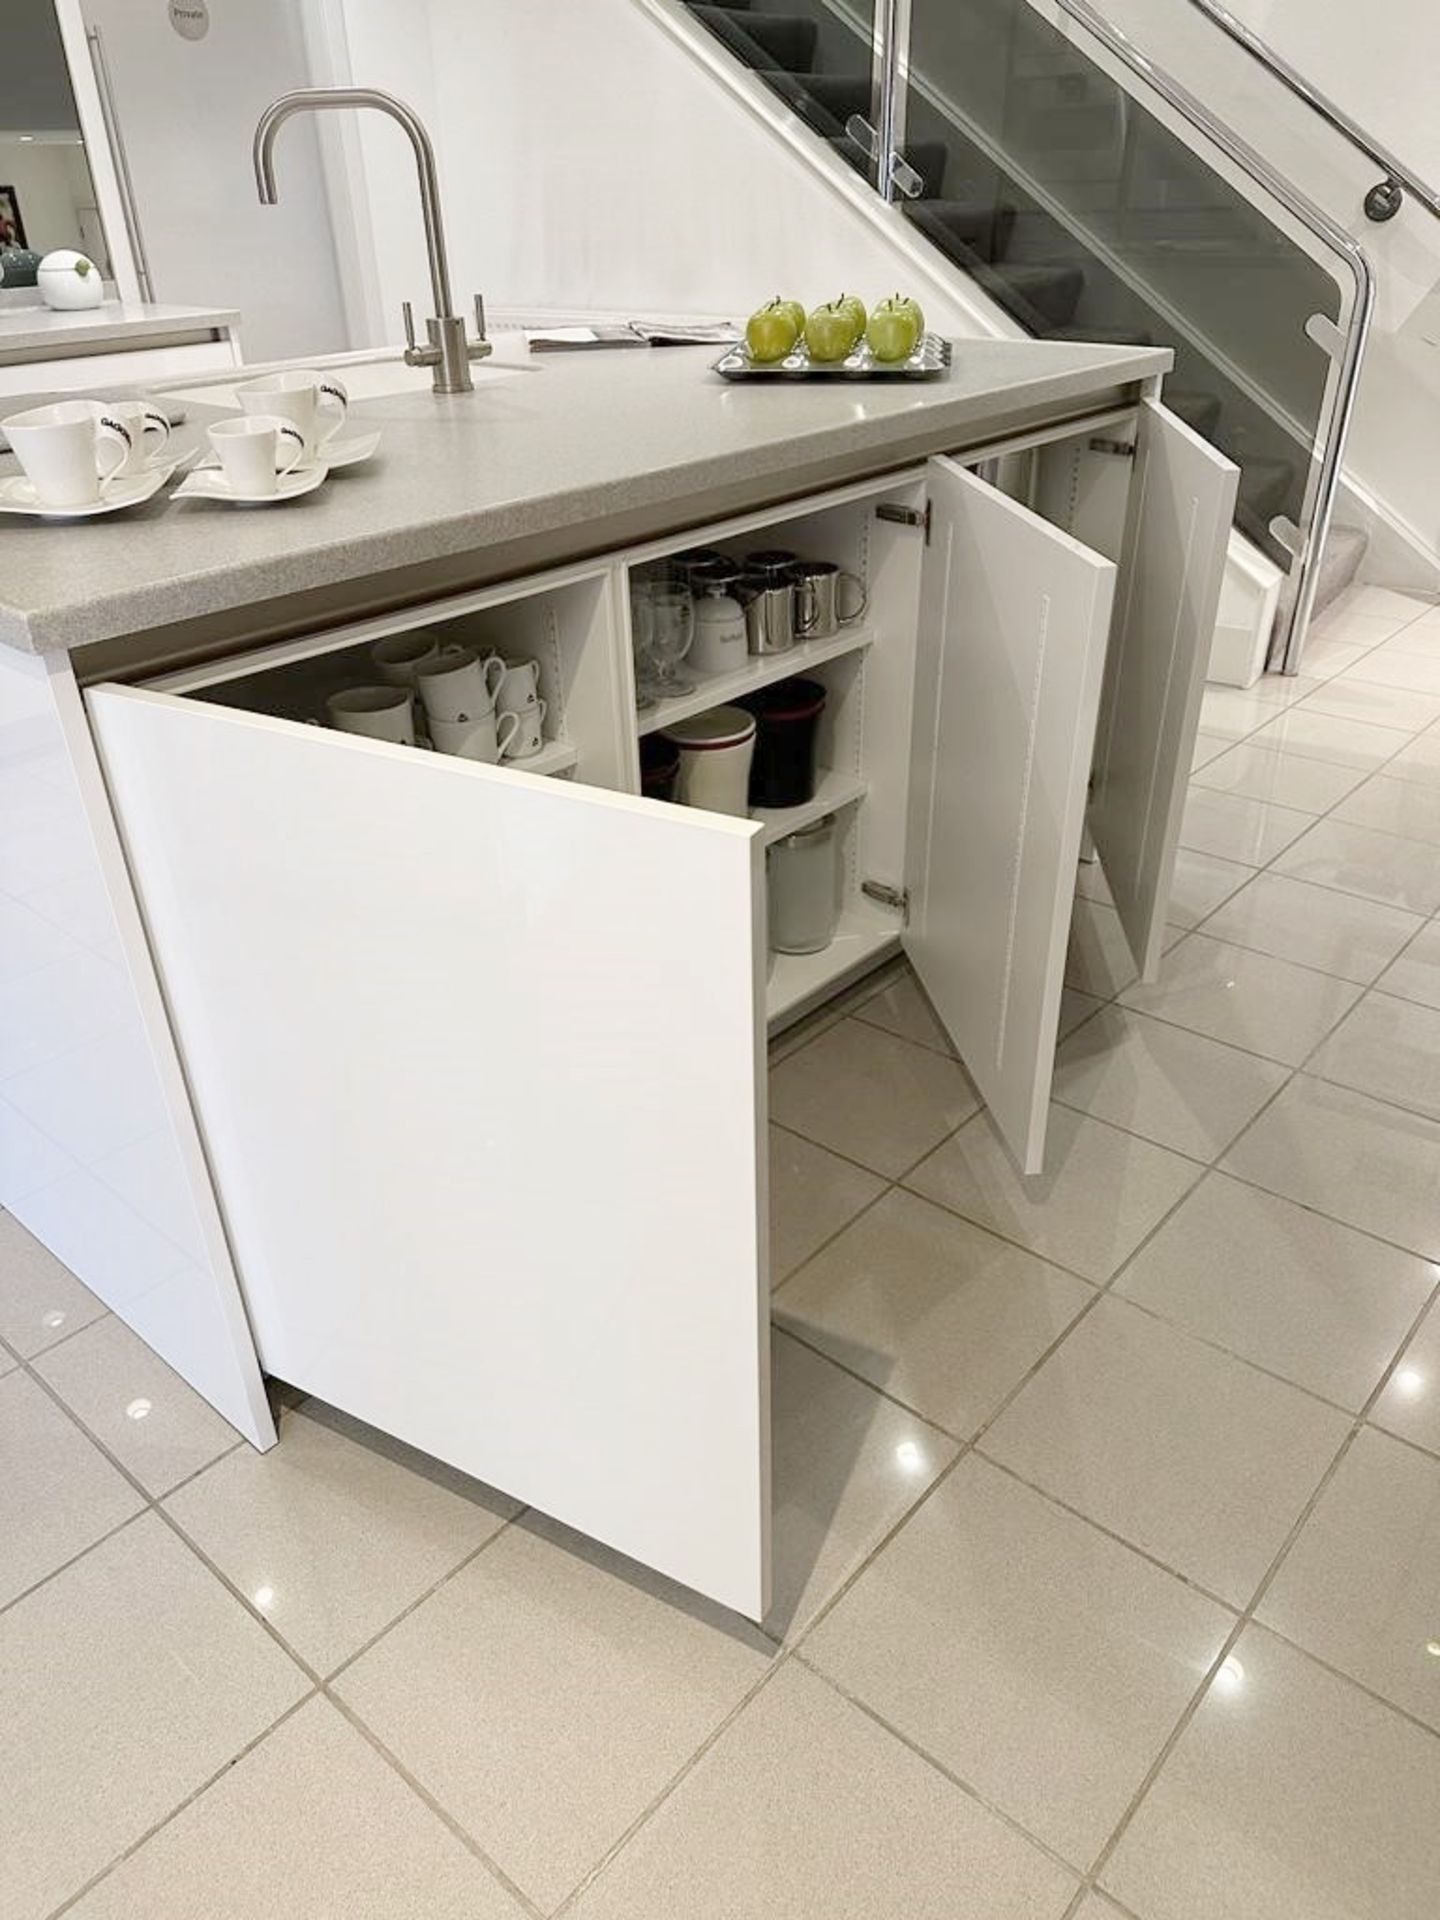 1 x SIEMATIC Contemporary 'S2' Fitted Kitchen In Gloss White And Grey *Ex-Display Showroom Model* - Image 15 of 16